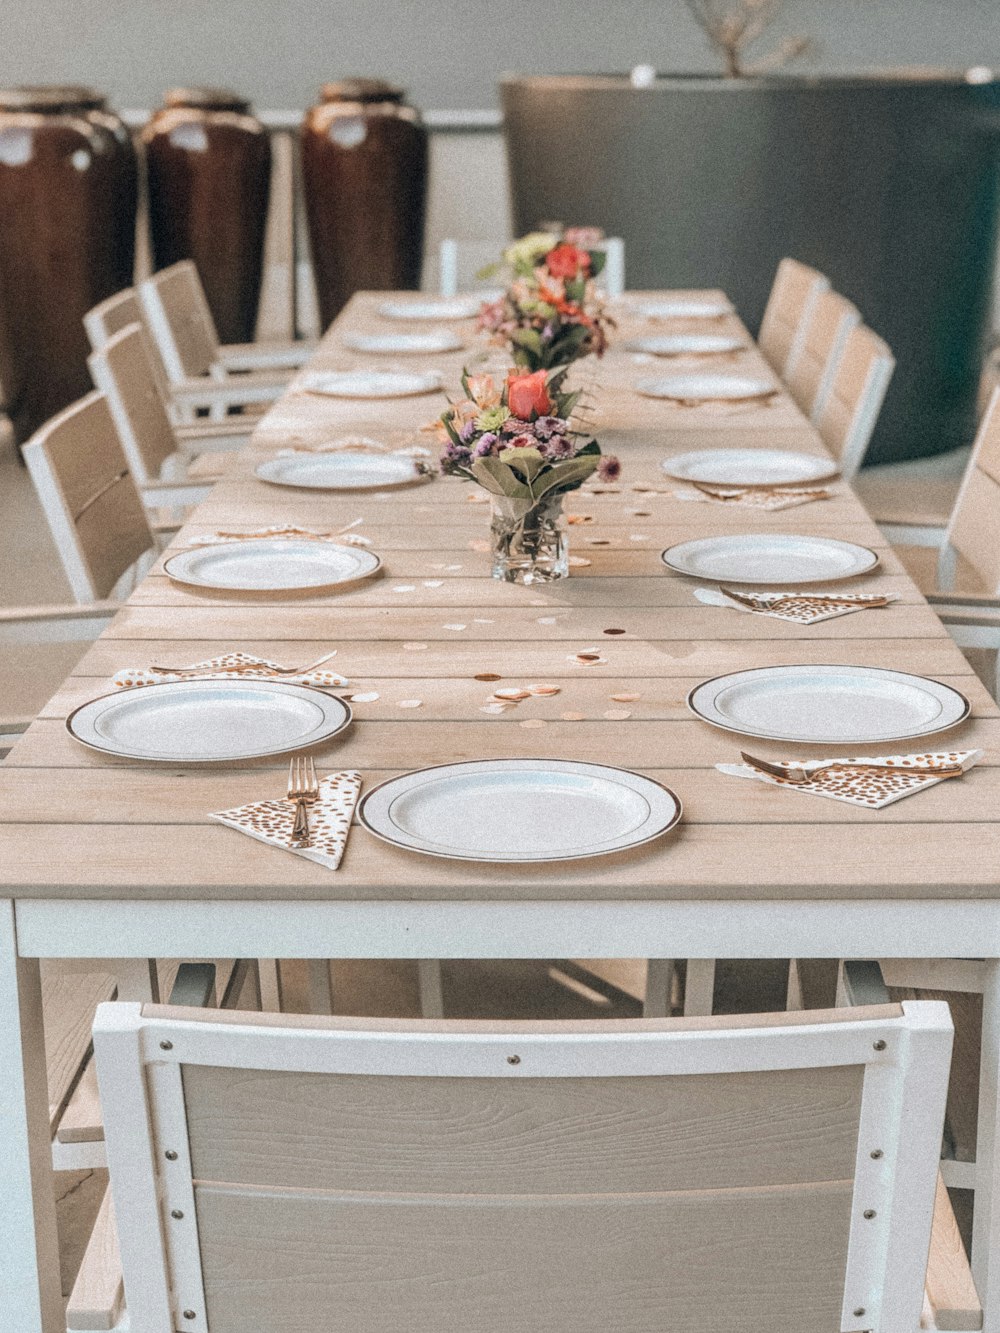 white ceramic plates on dining table with chairs